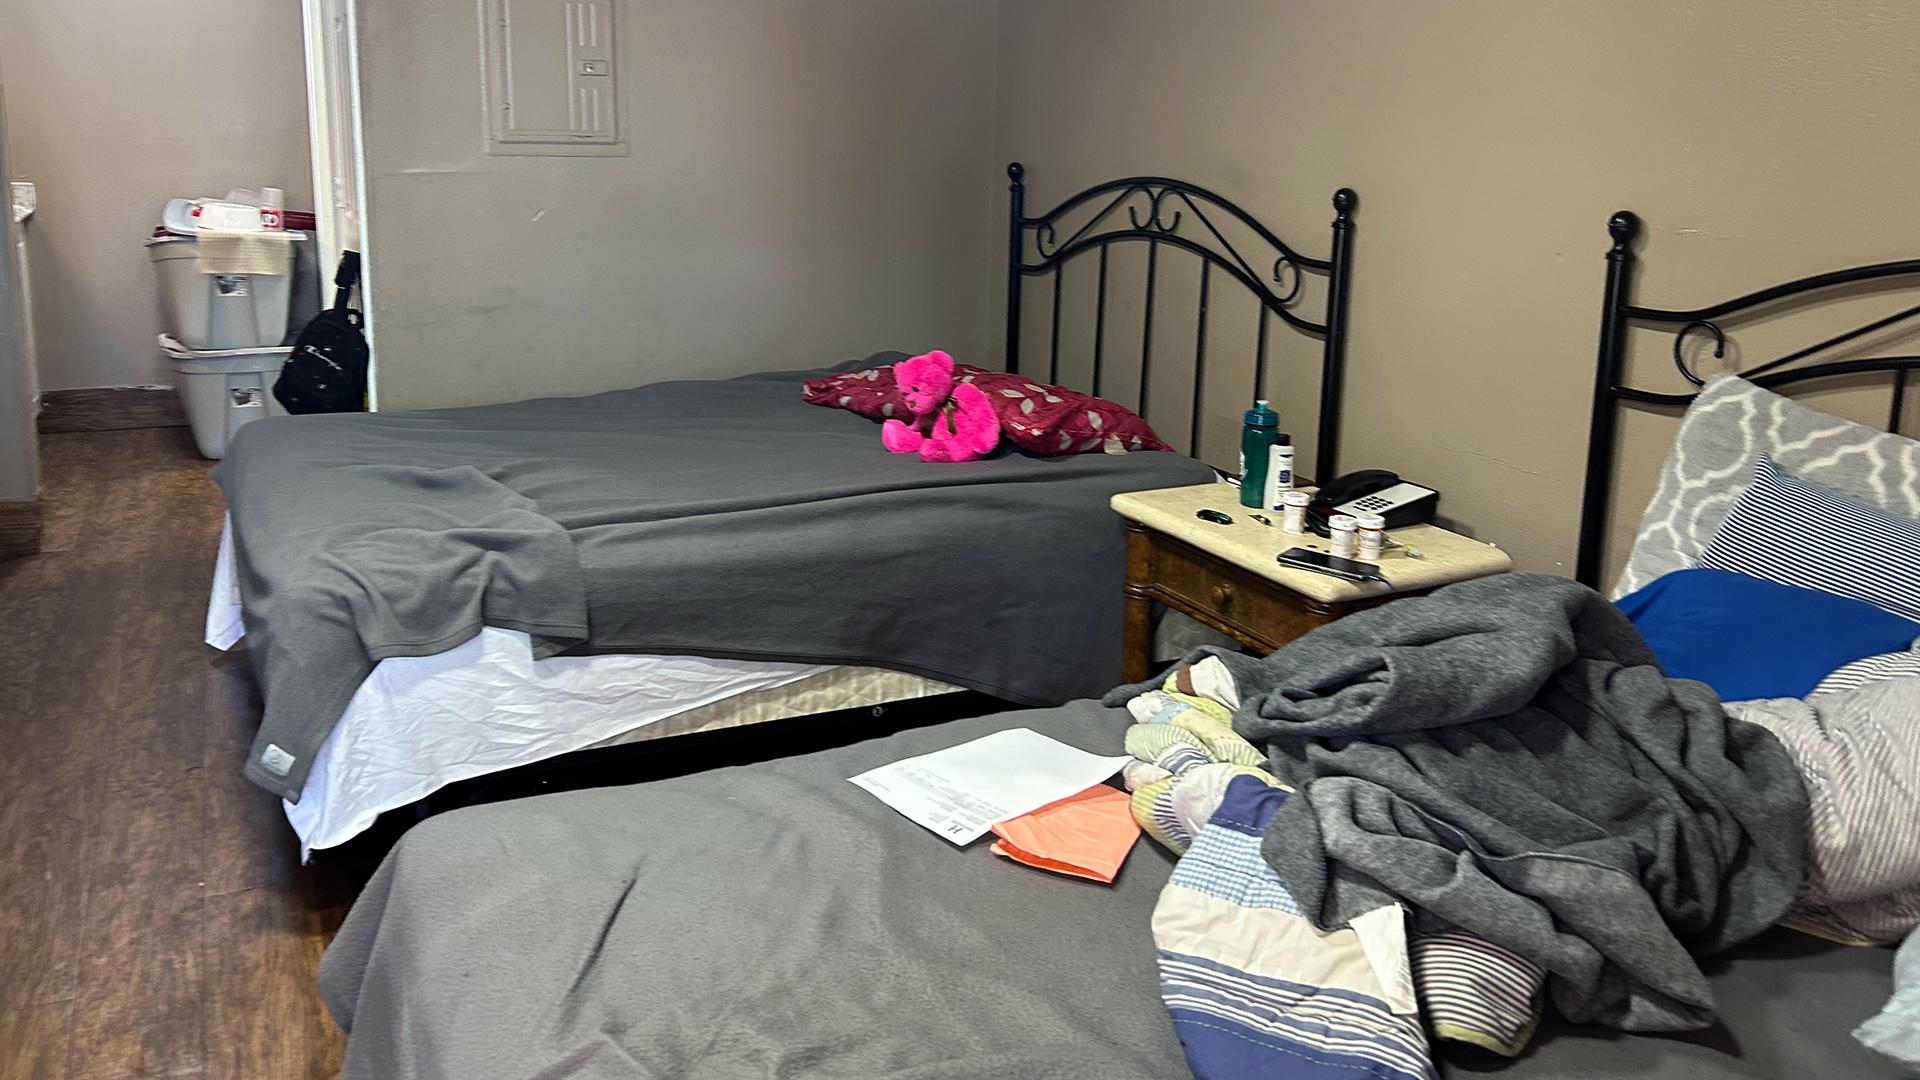 Rooms like this one are typical of those Sherri McCoy locates to provide families with temporary housing. (Photograph by Mercedes Kane)